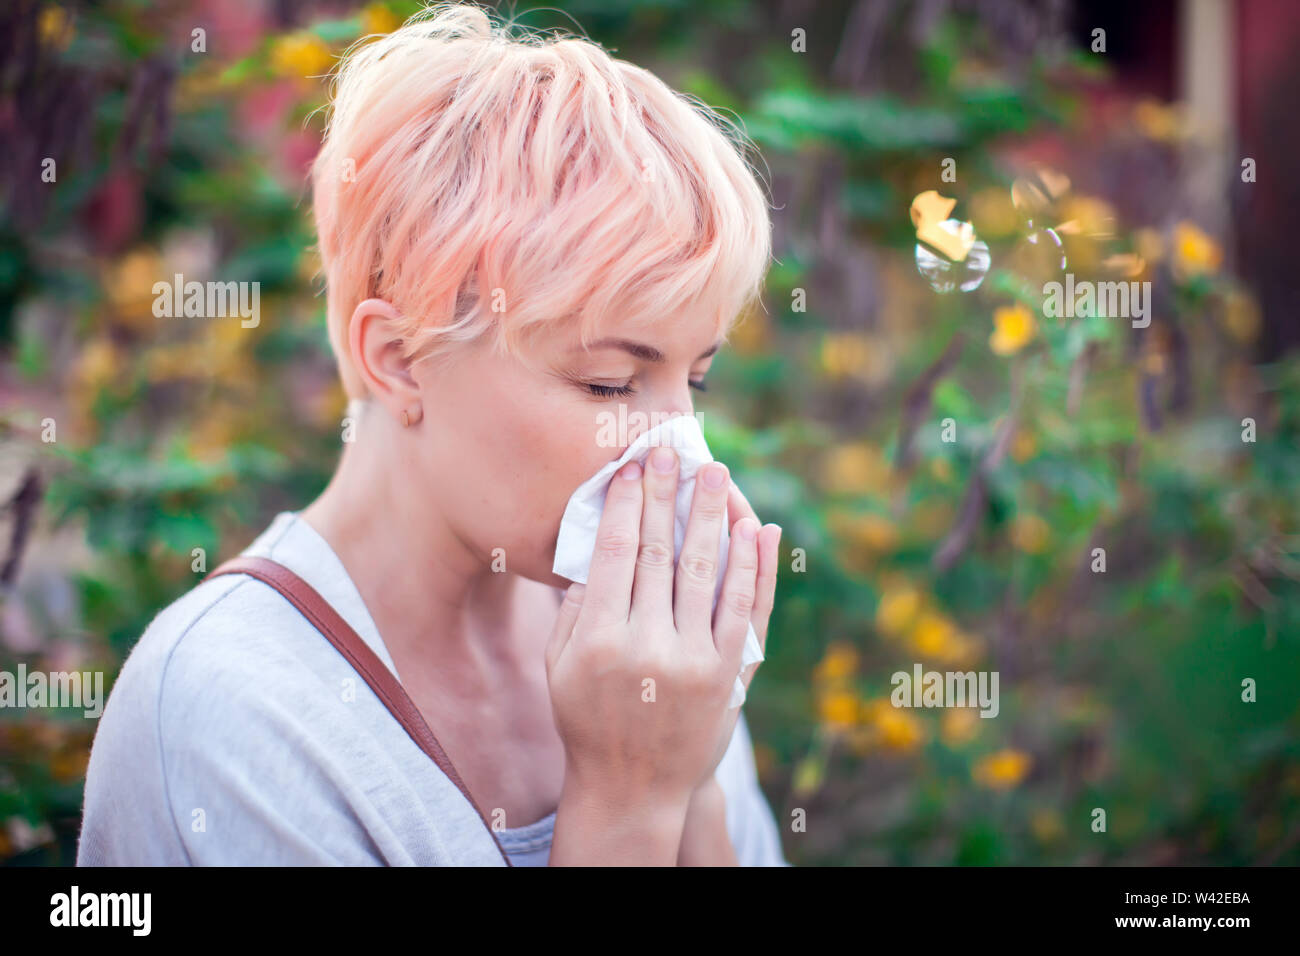 Young woman with short hair sneezing into tissue. flu, allergy, runny nose. People and healthcare concept Stock Photo